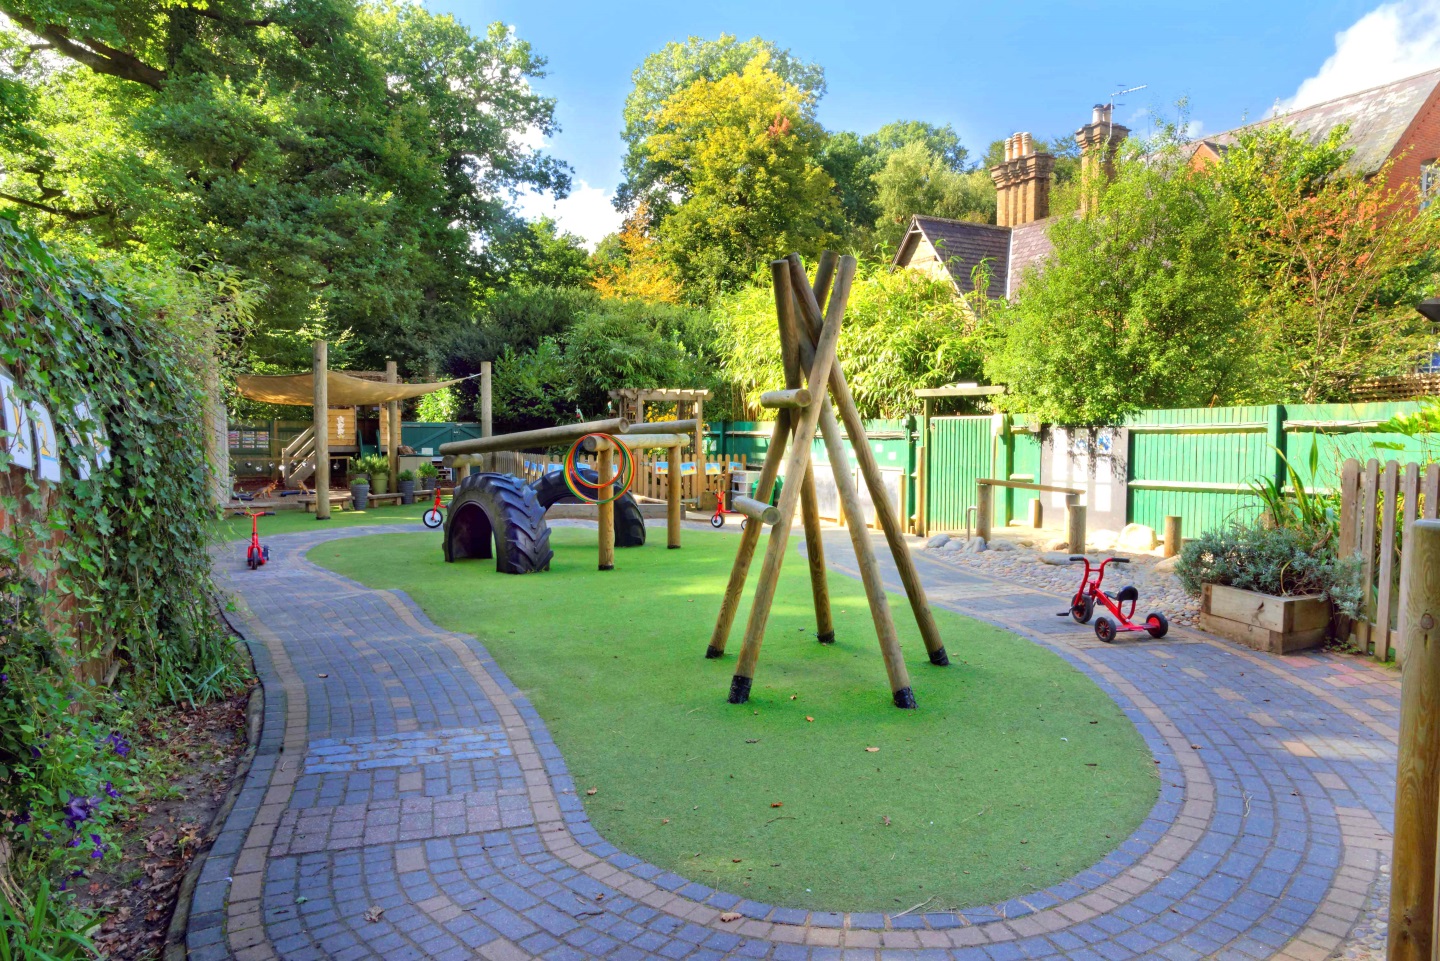 Asquith Woodlands Day Nursery and Preschool